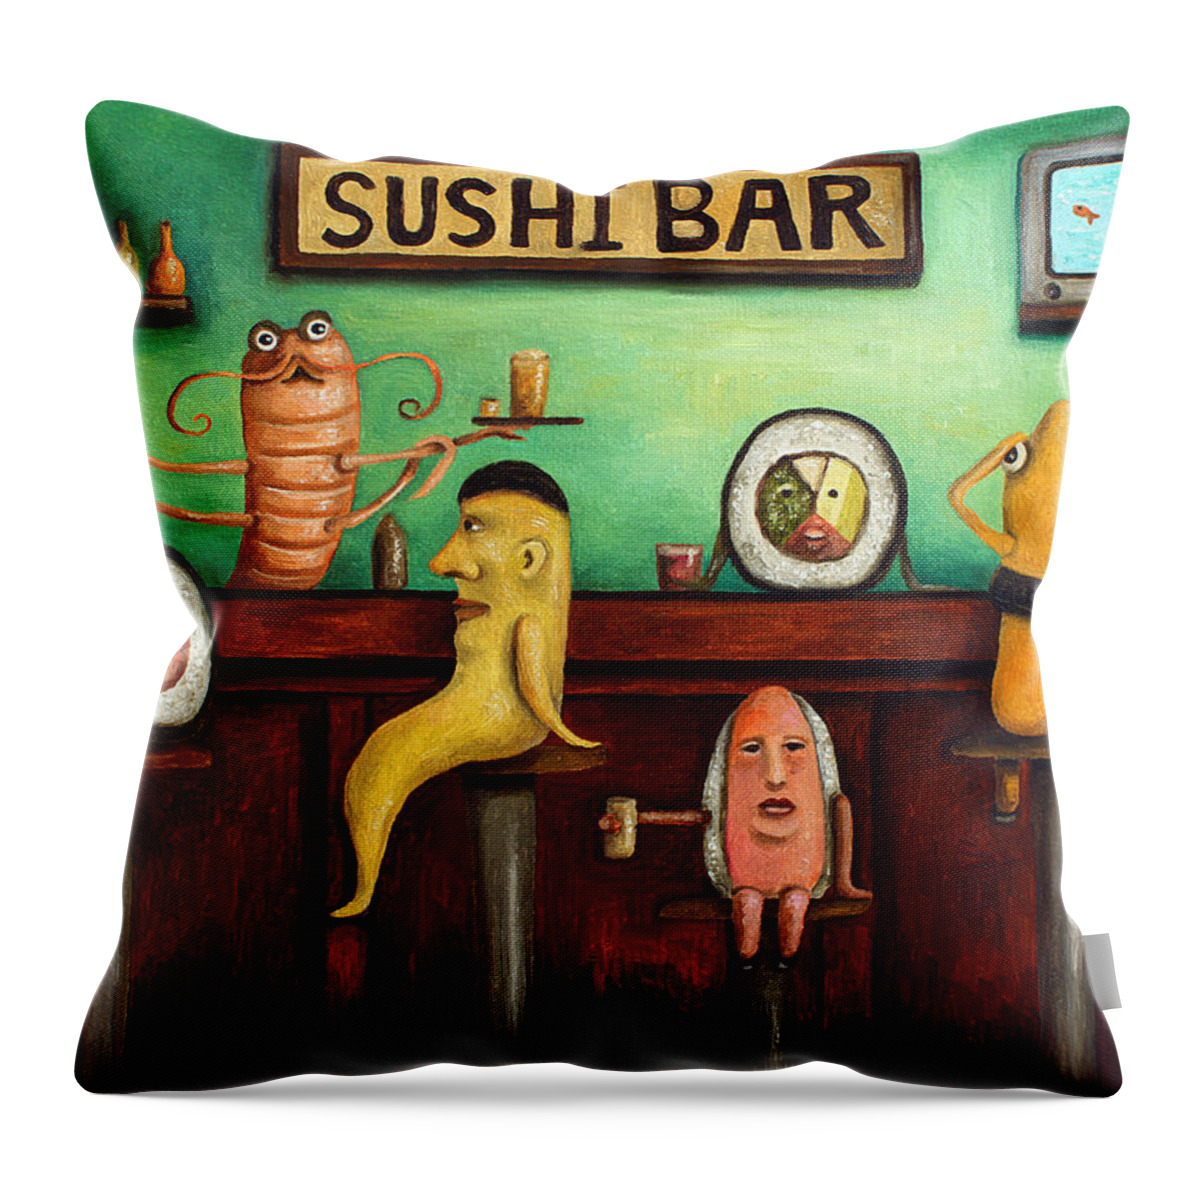 Sushi Throw Pillow featuring the painting Sushi Bar Improved Image by Leah Saulnier The Painting Maniac